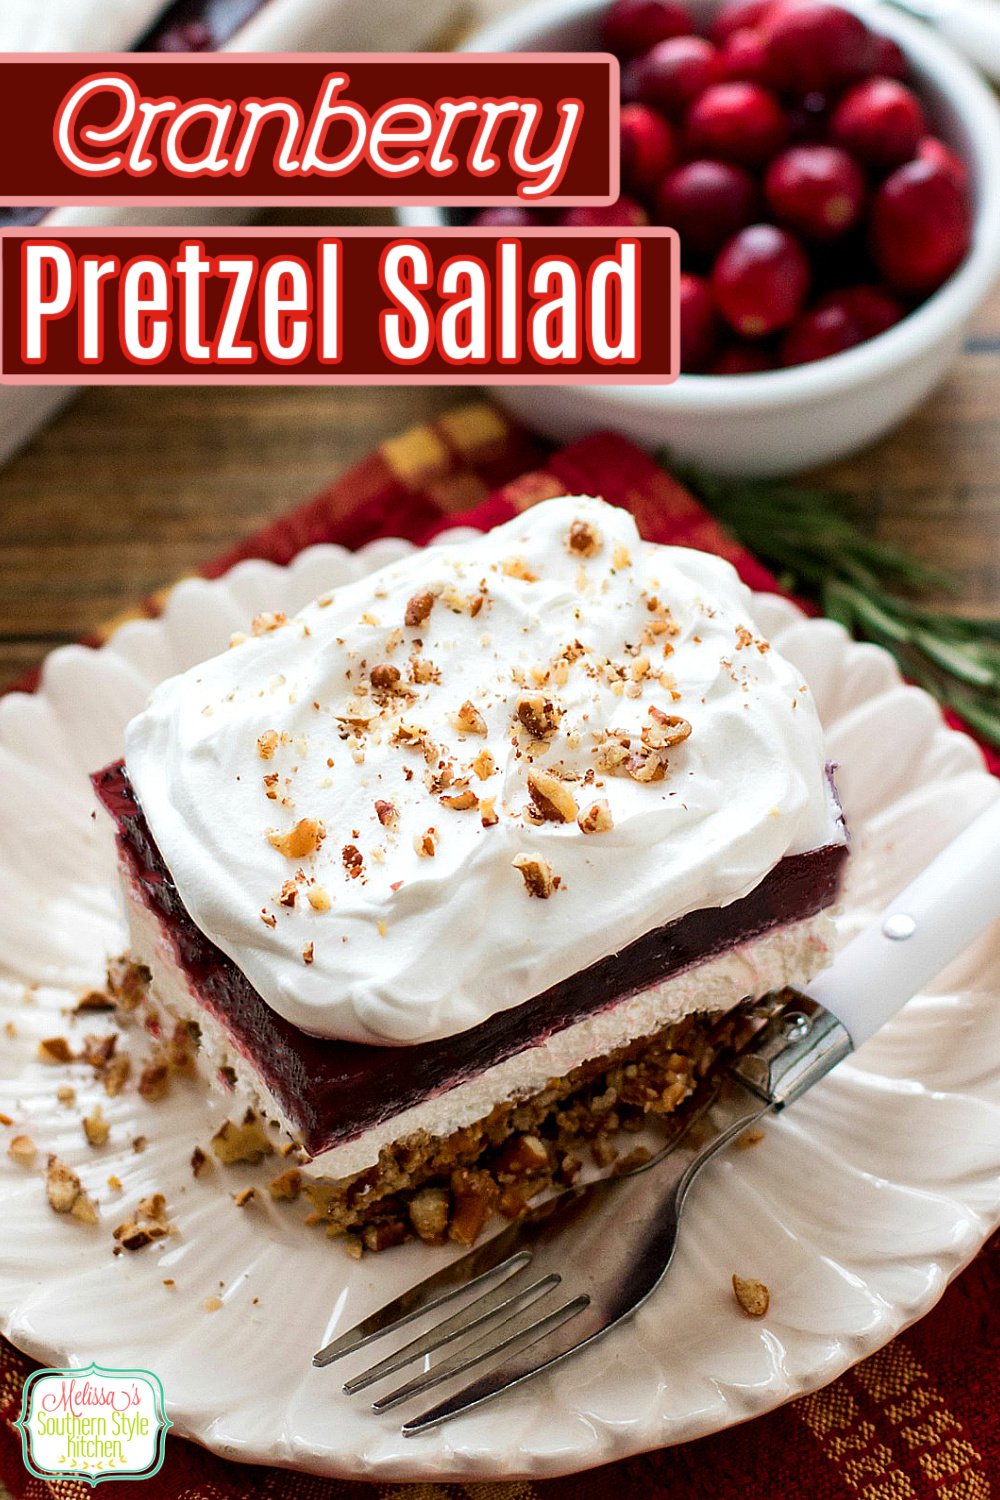 Enjoy this Cranberry Pretzel Salad as a side dish or a sweet and salty holiday dessert #cranberrypretzlesalad #cranberries #pretzelsalad #sweets #thanksgiving #Christmas #holidaysidedishes #desserts #sidedish #cranberrydesserts #strawberrypretzelsalad #southernrecipes #cranberrysauce #melissassouthernstylekitchen via @melissasssk